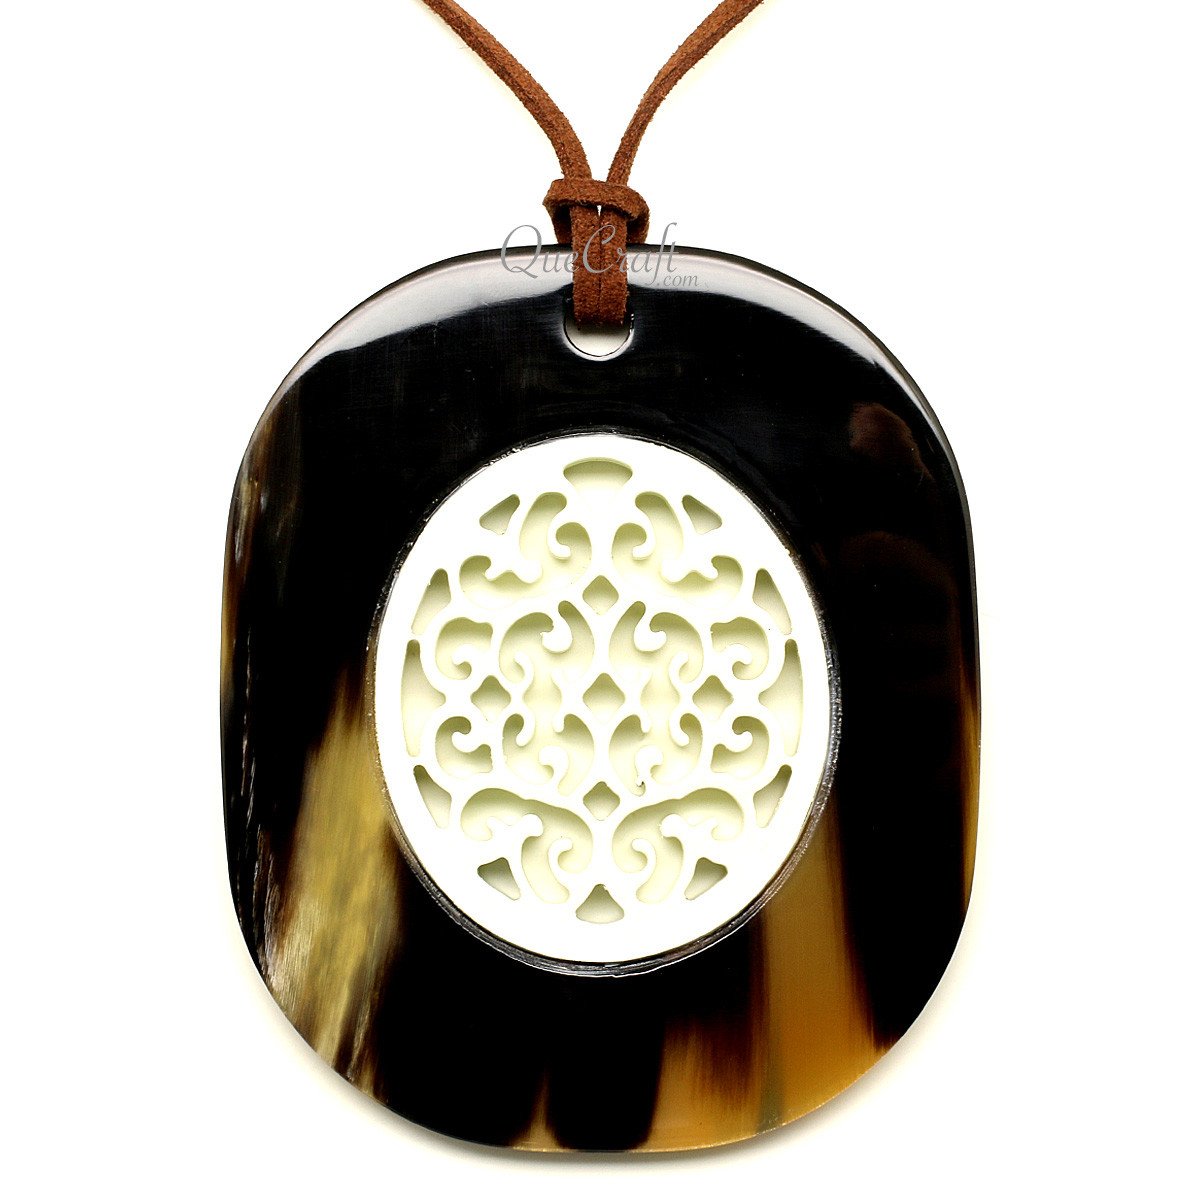 Horn & Lacquer Pendant #12259 - HORN JEWELRY